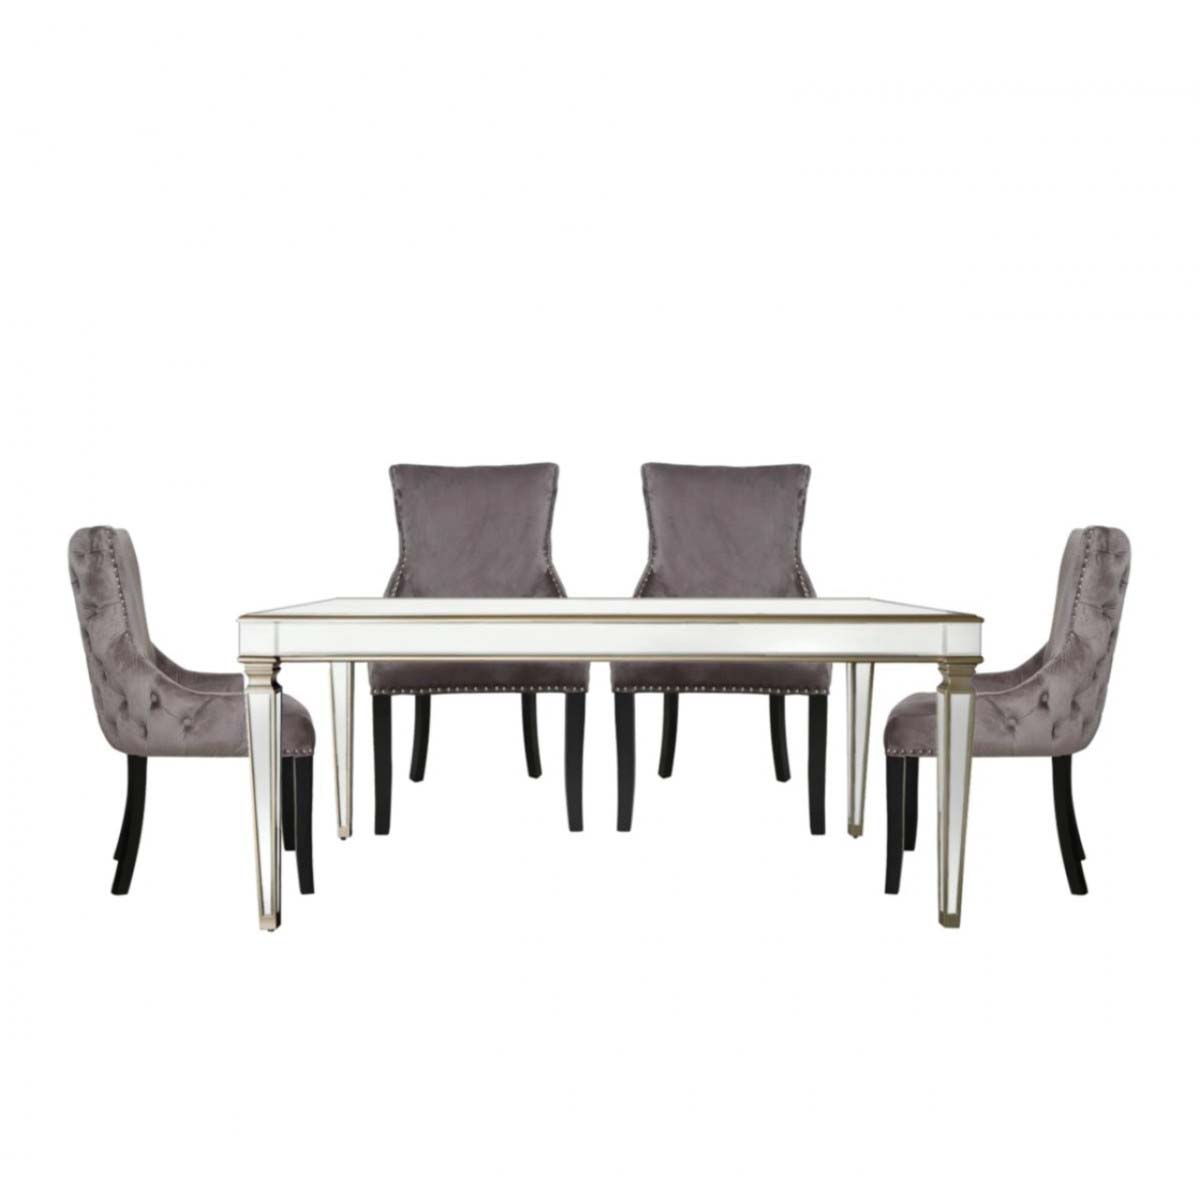 Andreas Champagne Trim Mirrored 5 Piece Set - Grey Chairs